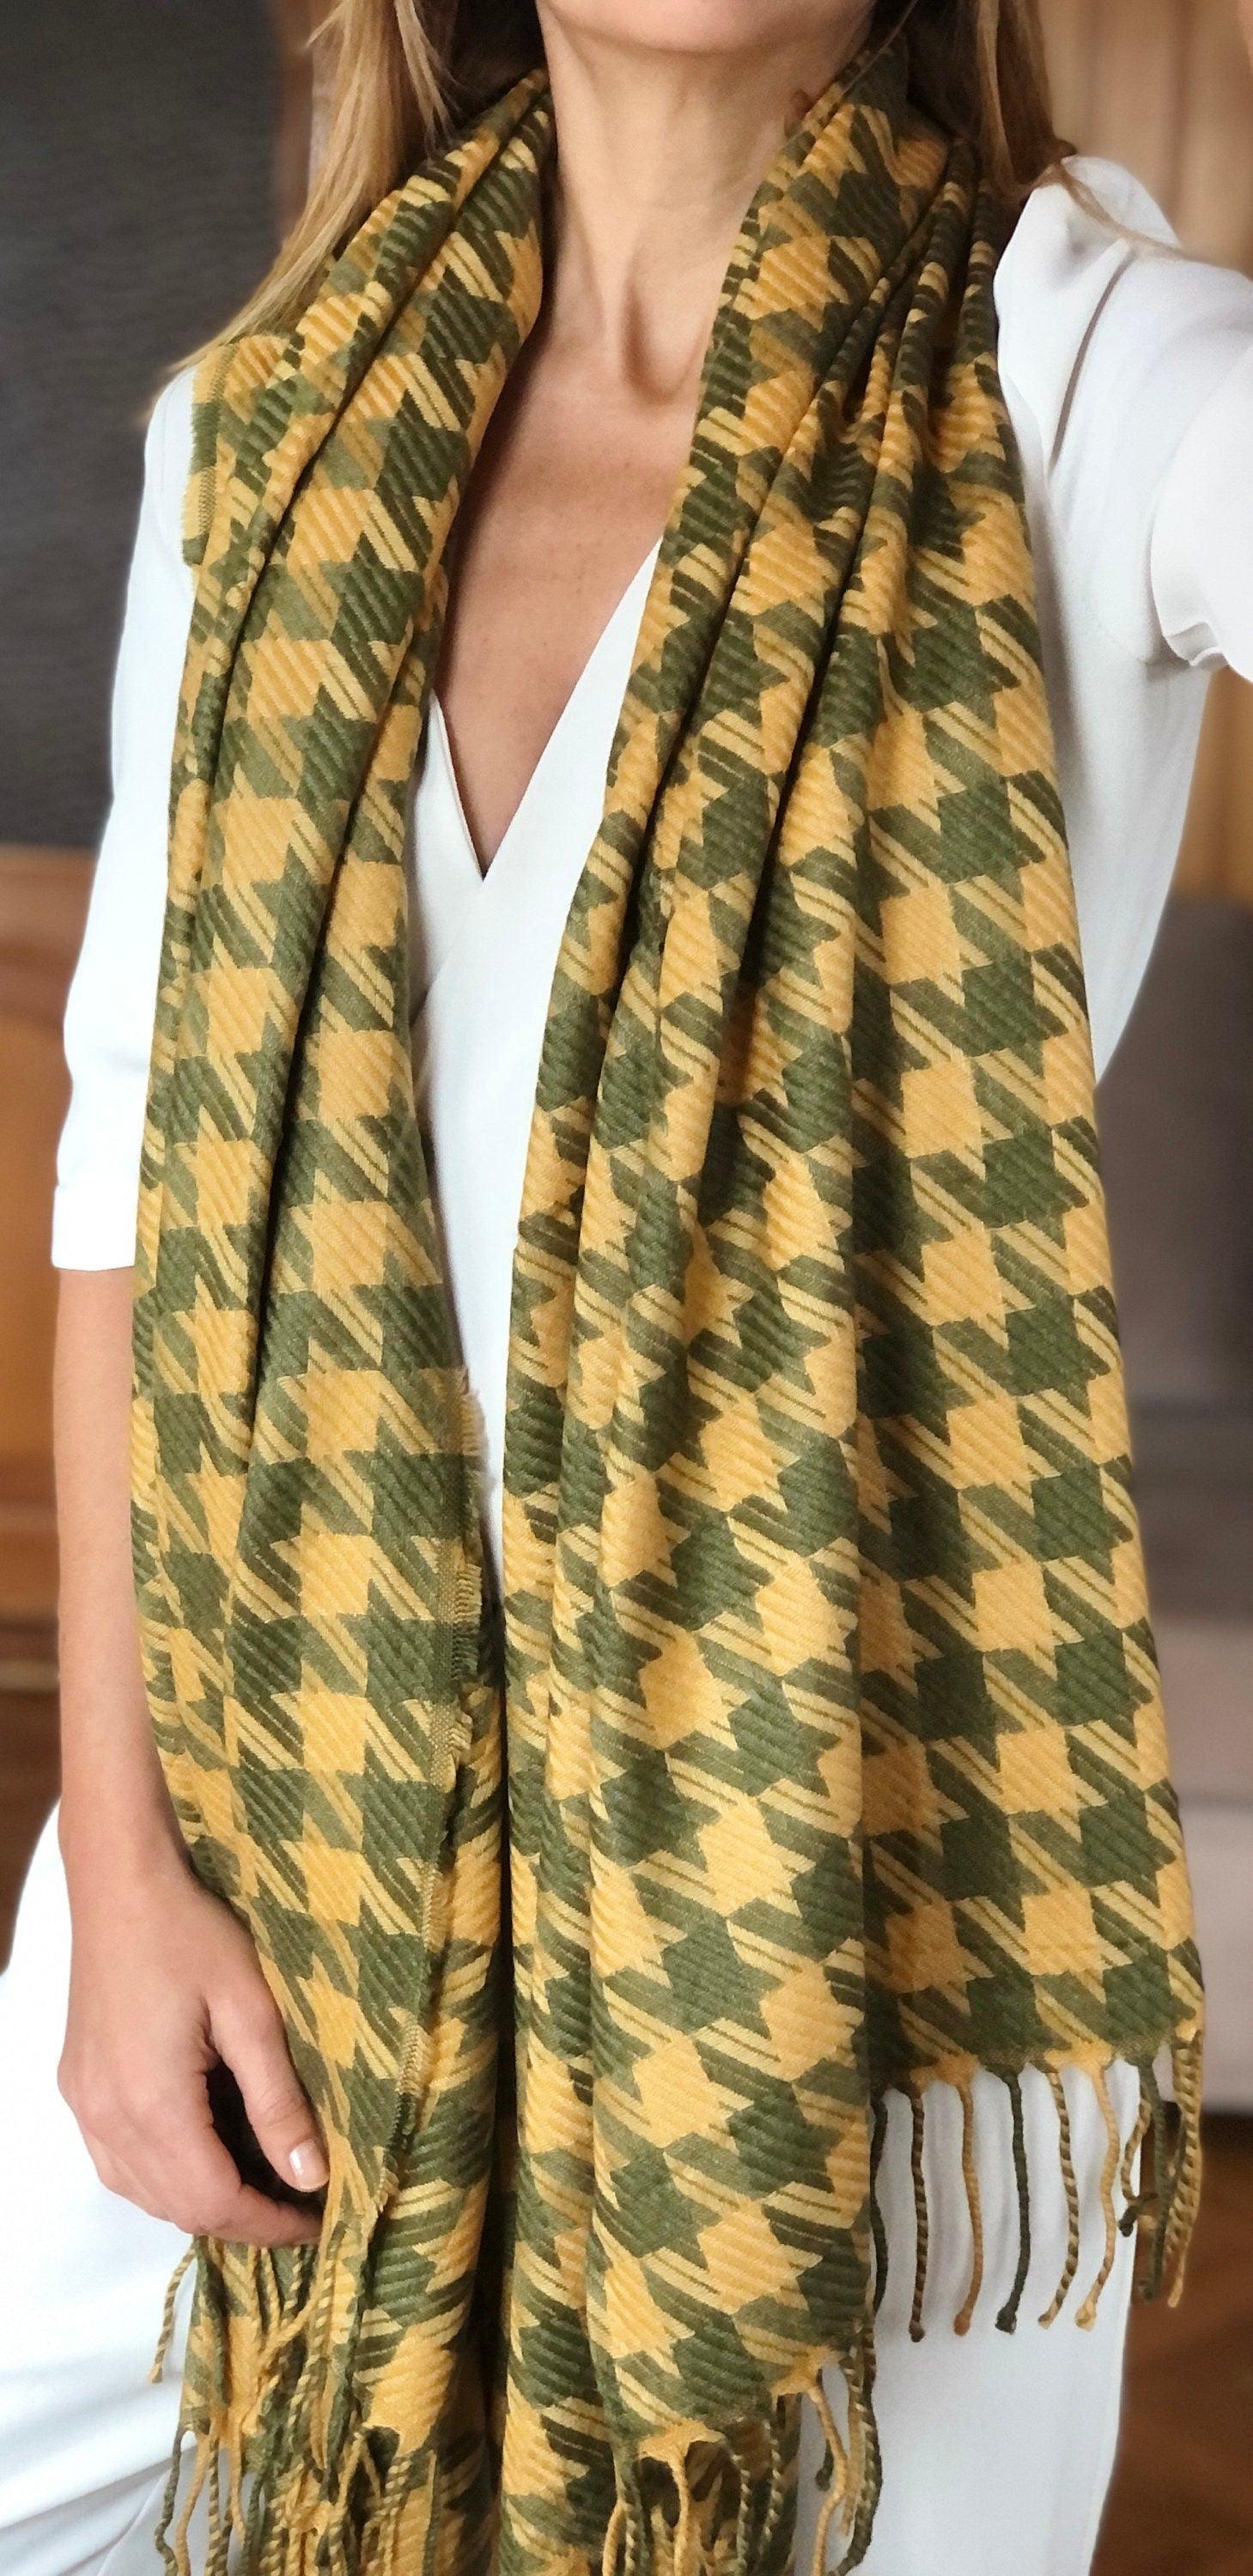 Charming Long Wool Acrylic Cotton Pattern Shawl in Yellow Khaki Green - Travel in Style with this Warm Scarf for Women available at Moyoni Design